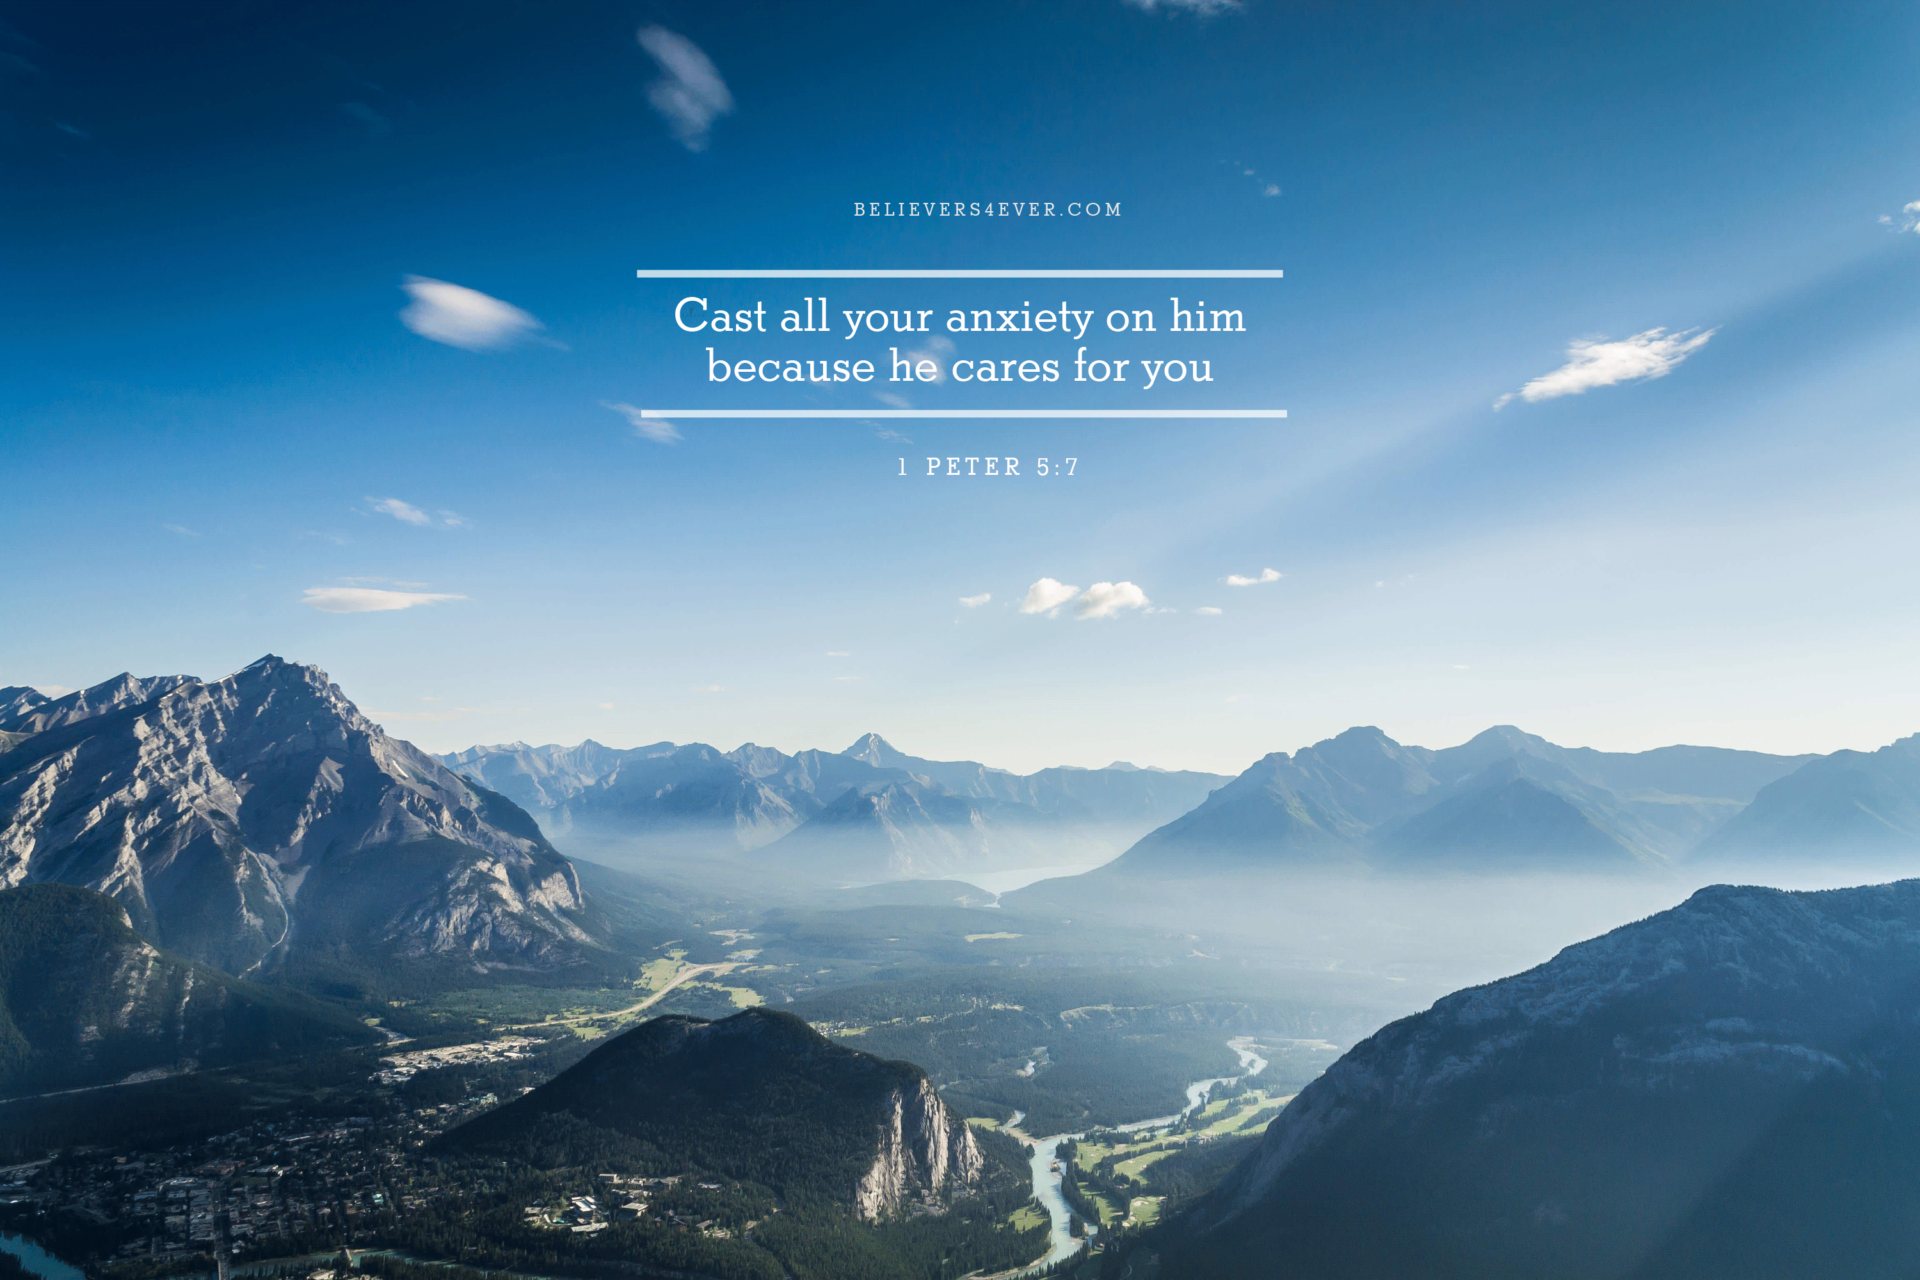 Cast All Your Anxiety On Him Christian Wallpaper Hd - Desktop Wallpaper Christian , HD Wallpaper & Backgrounds